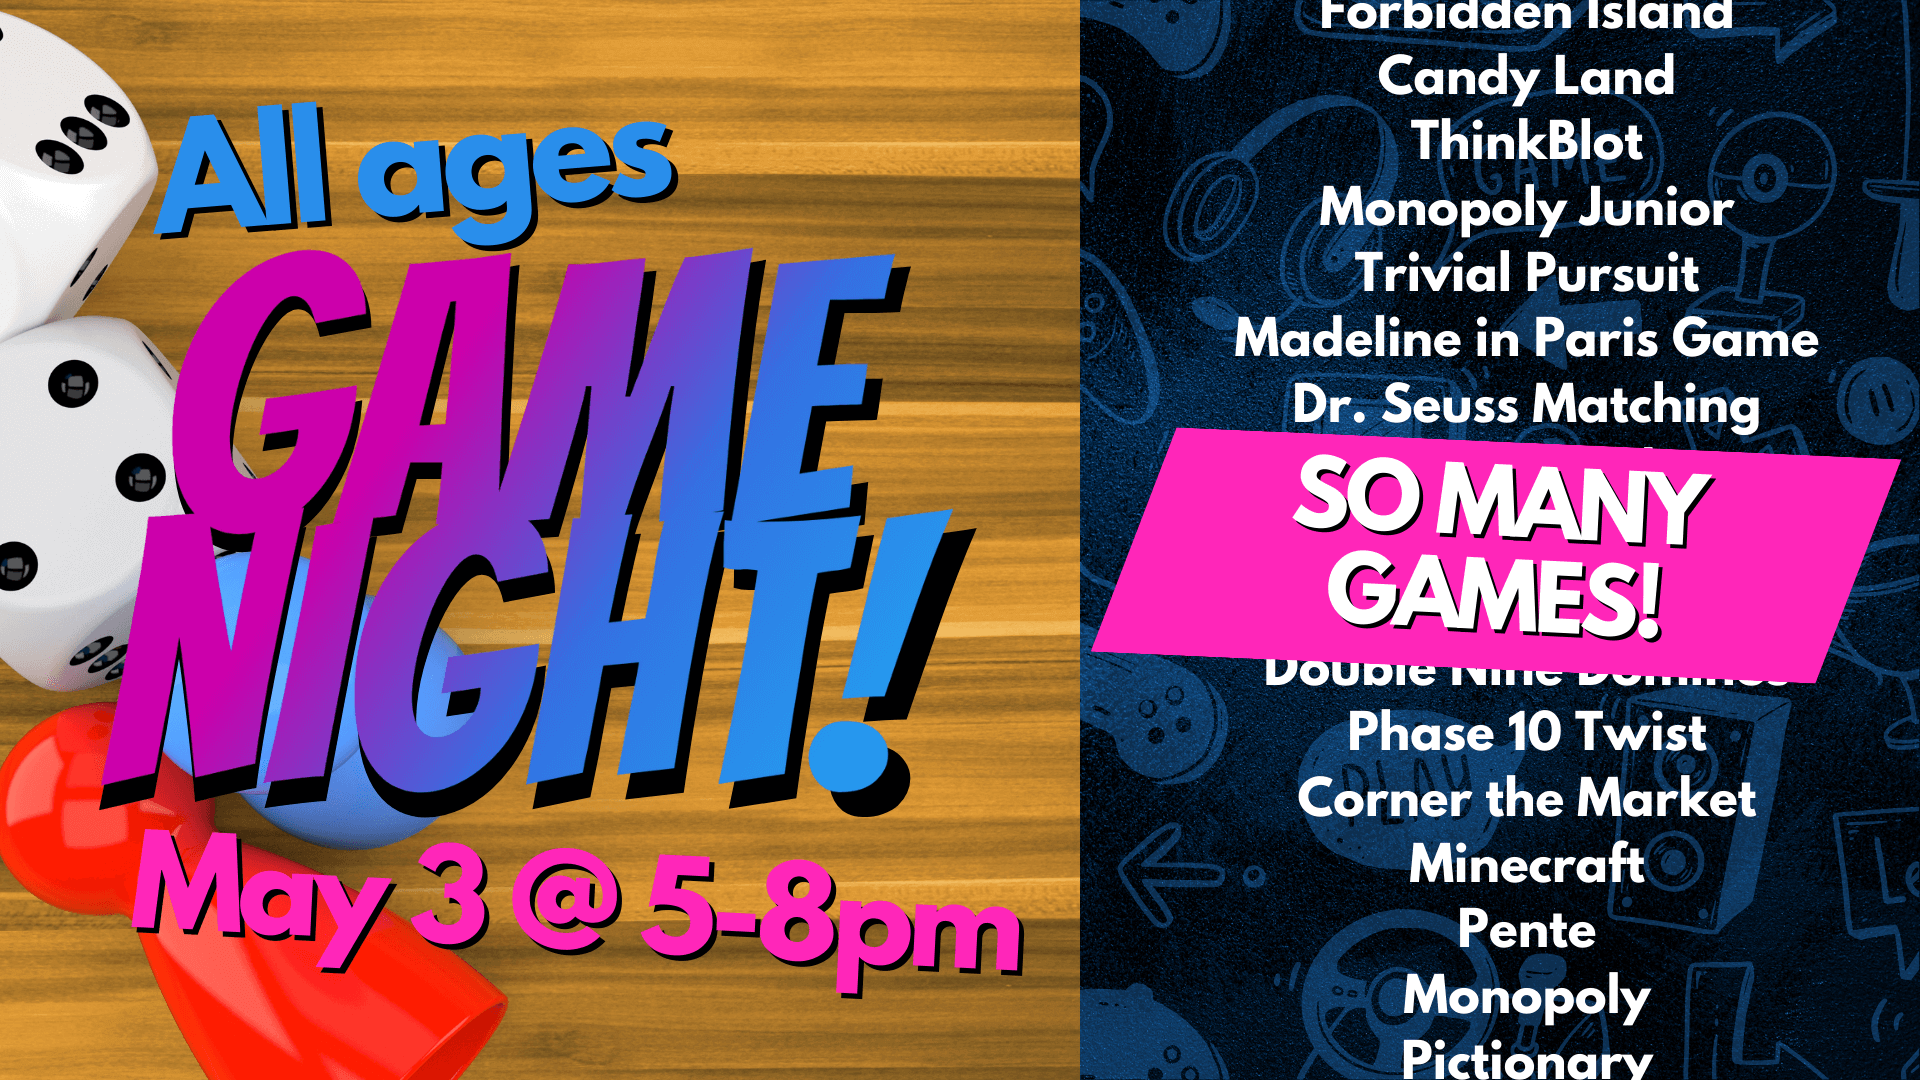 Game Night May 3 5-8pm all ages